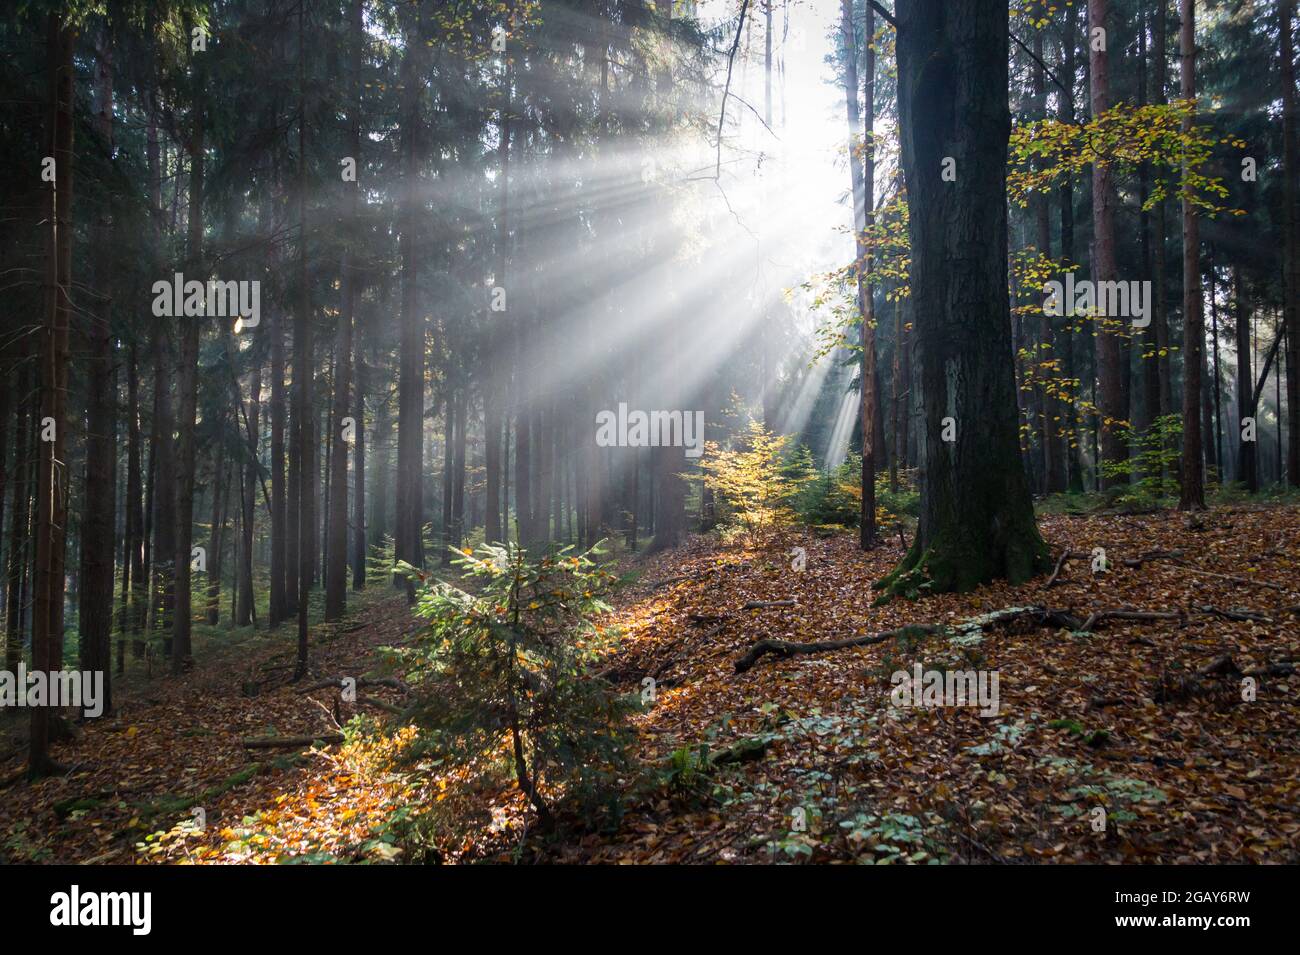 magical lights and dark shadows of tree trunks in the fairy tale forest Stock Photo